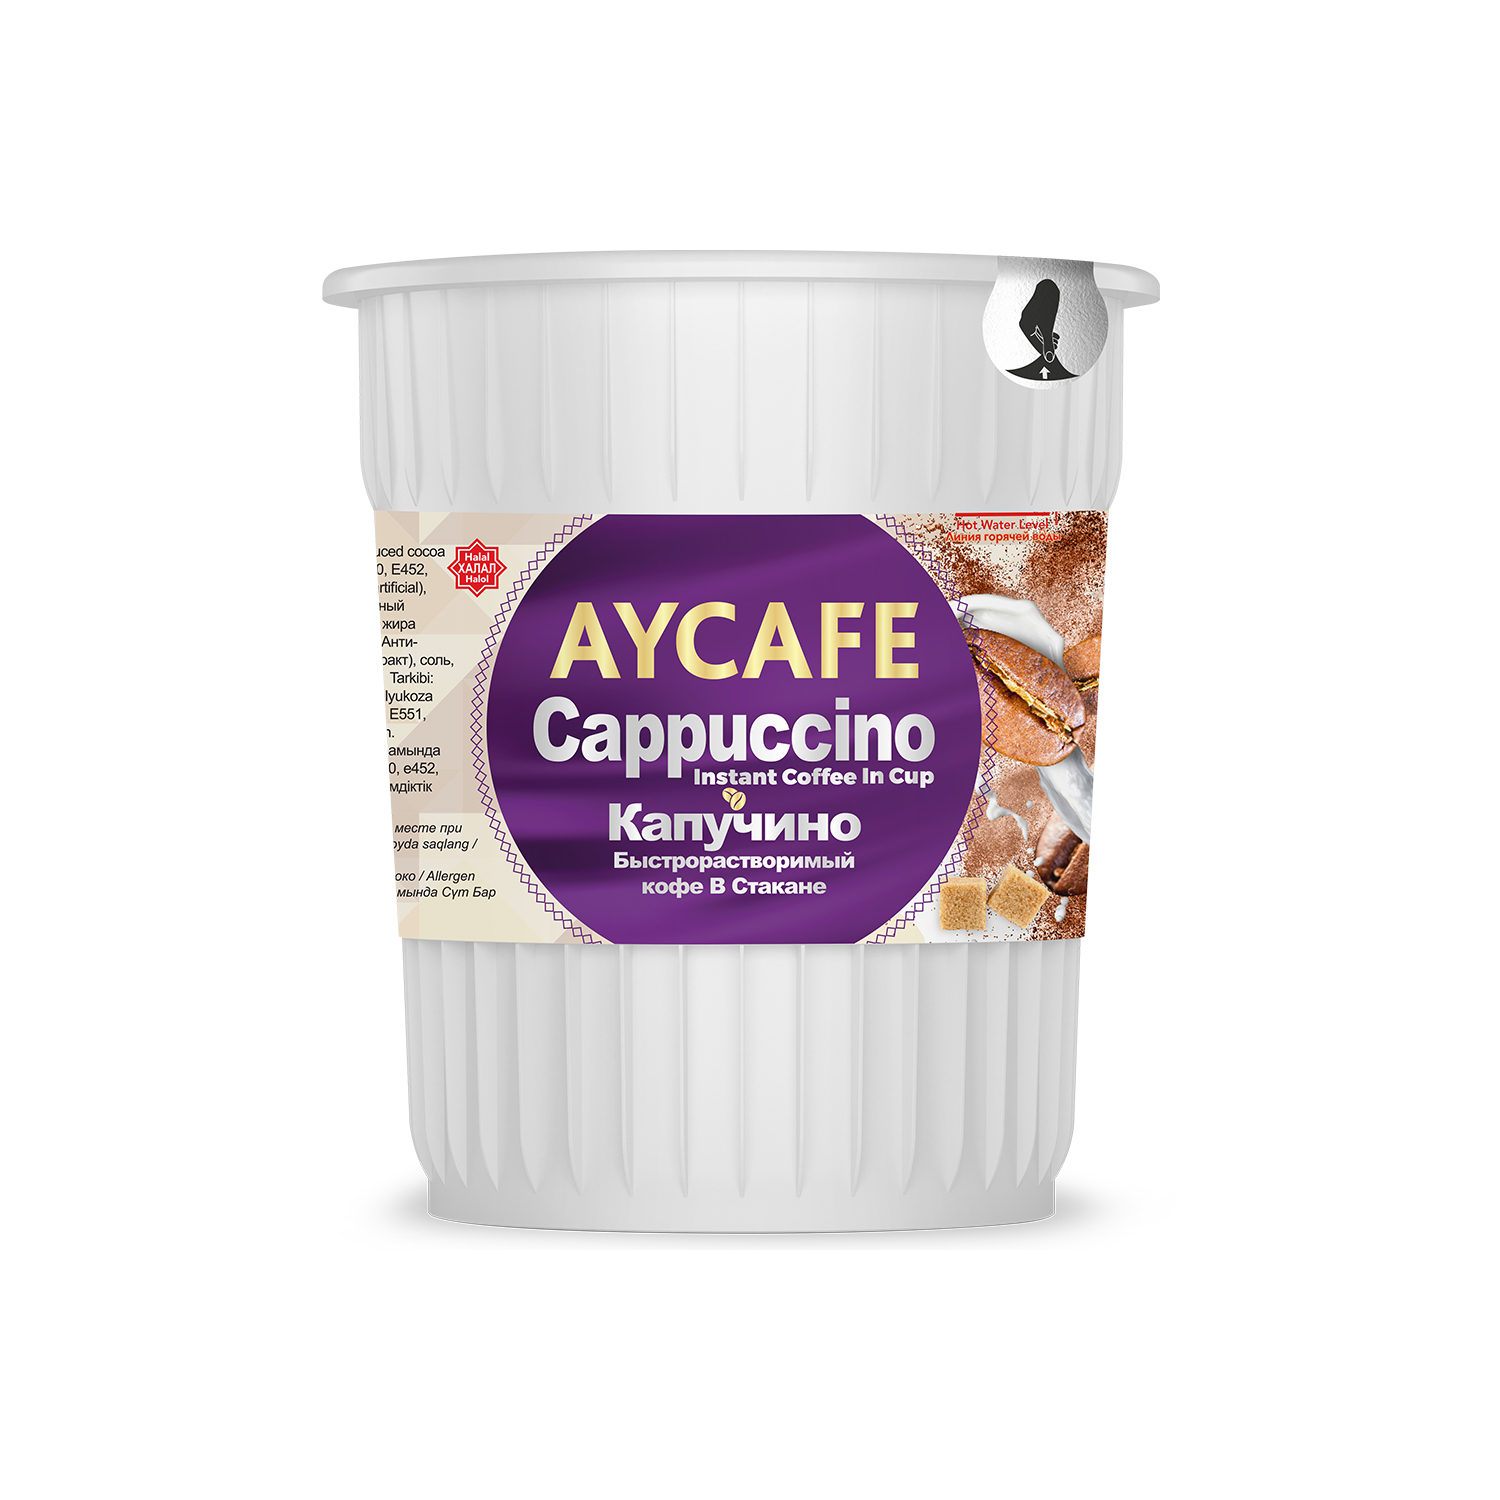 Aycafe Cappuccino Instant Coffee In Cup